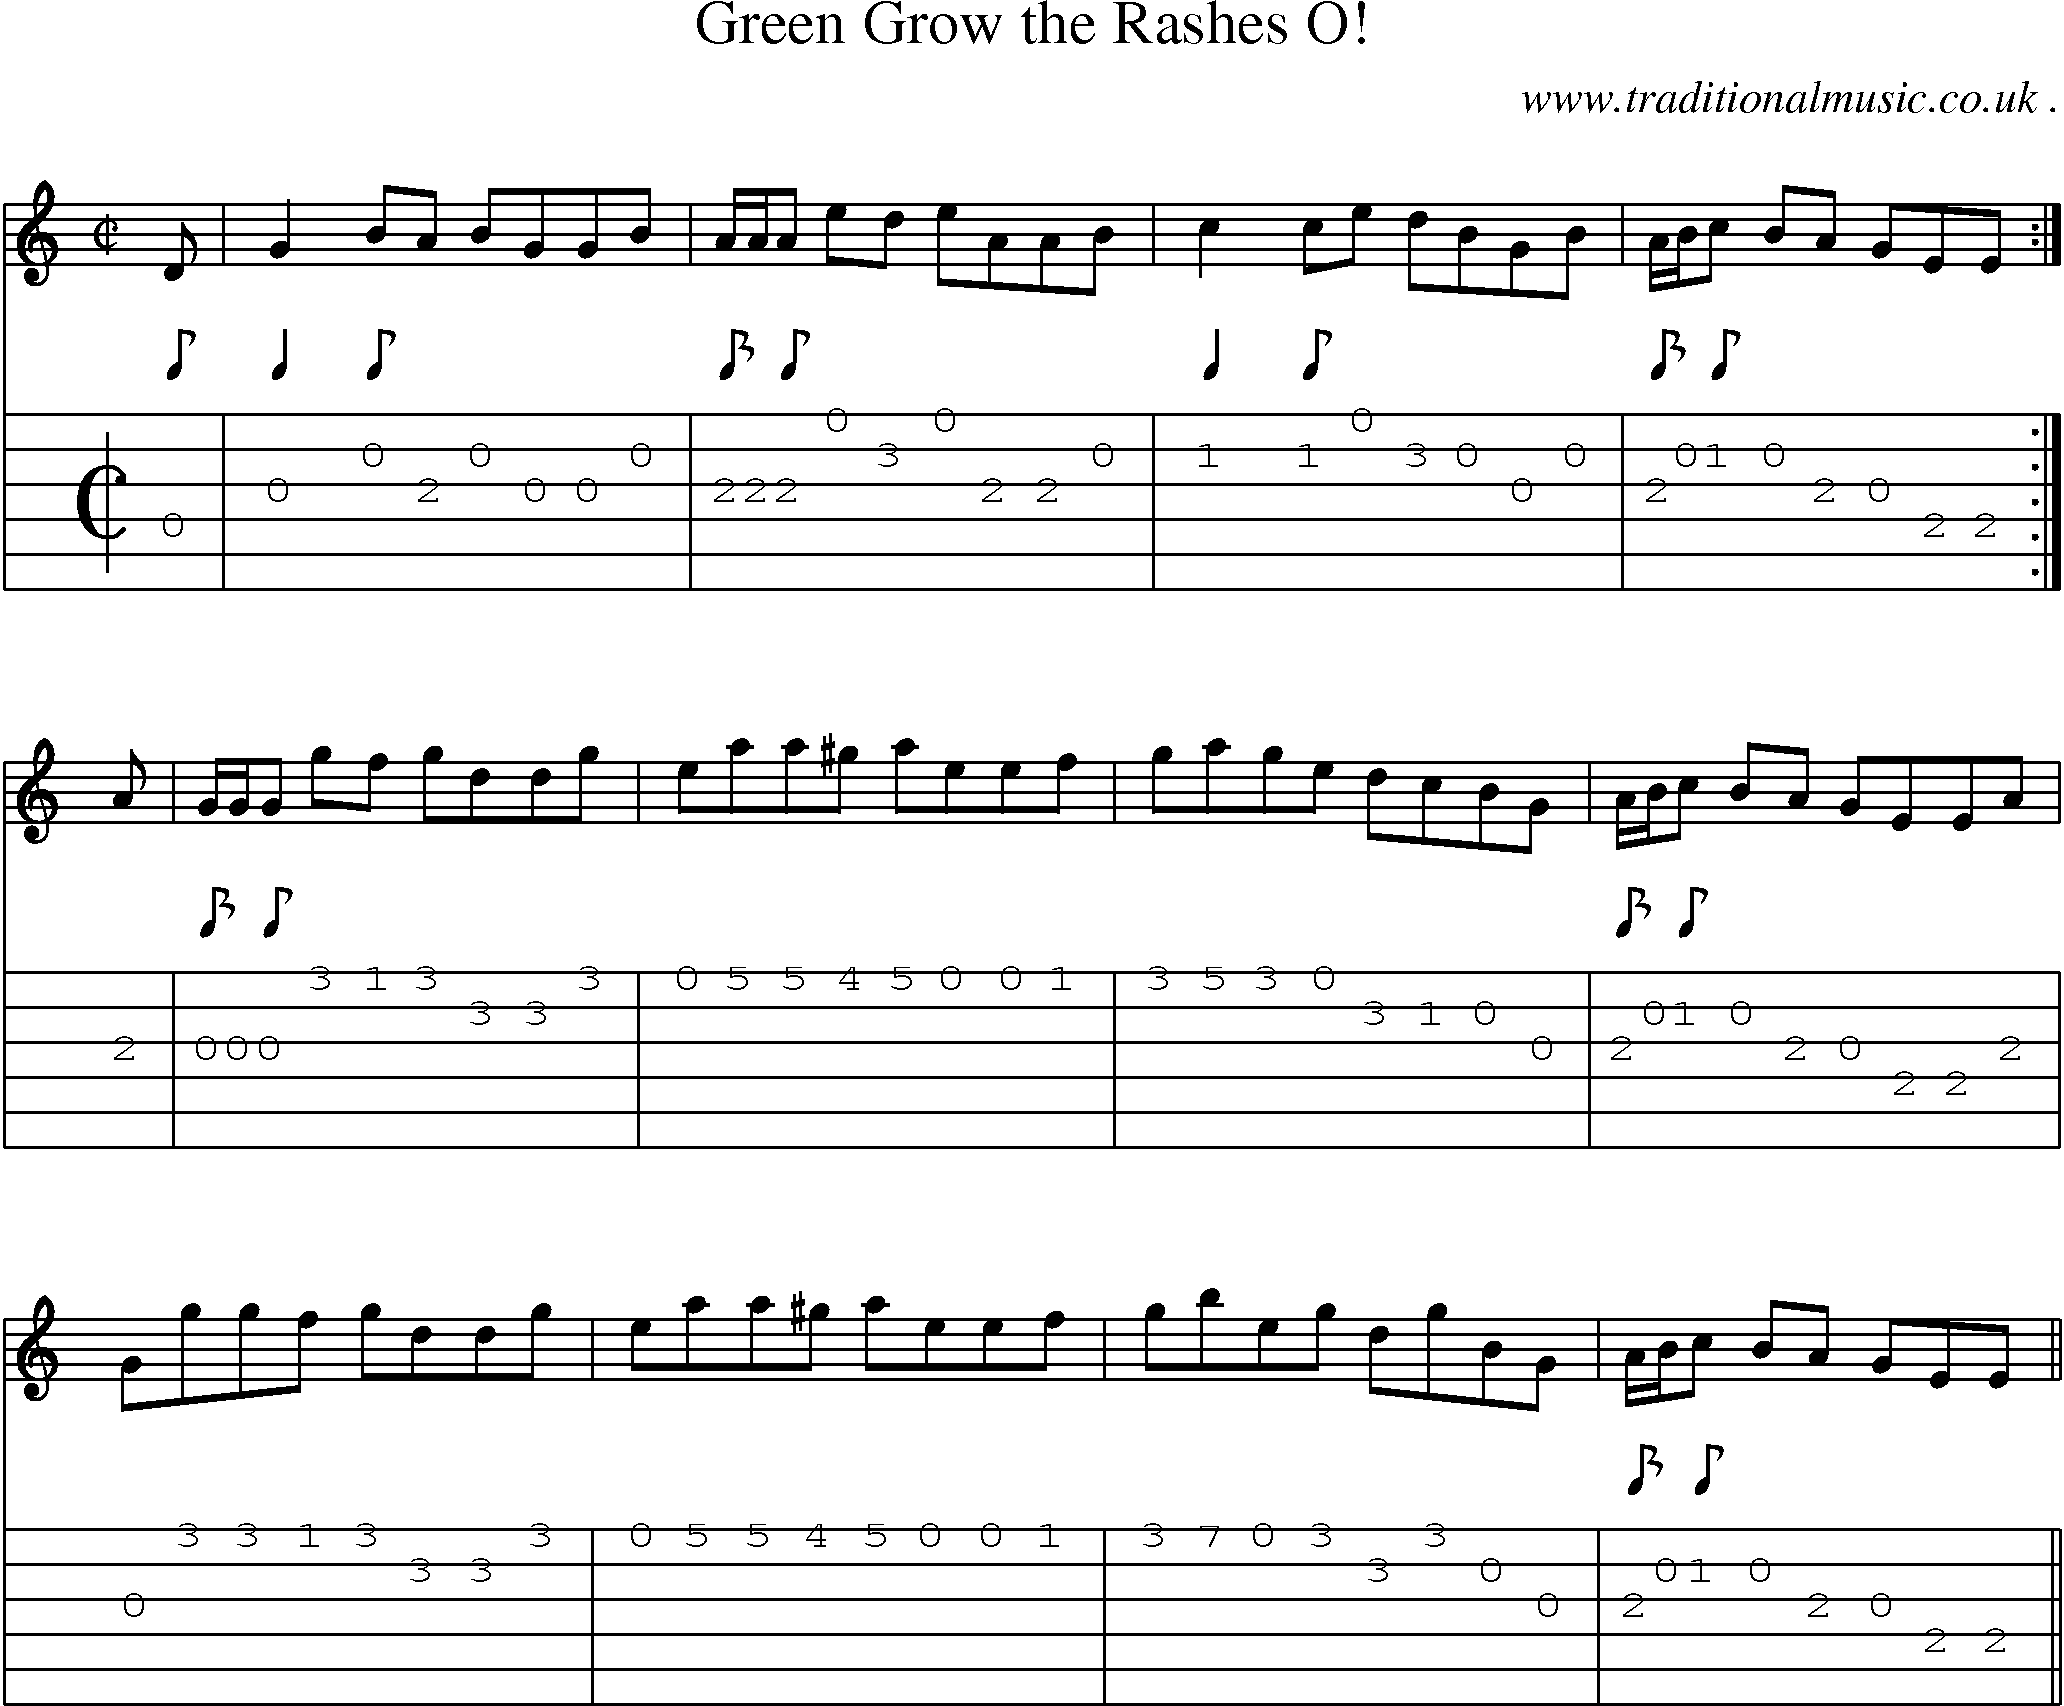 Sheet-music  score, Chords and Guitar Tabs for Green Grow The Rashes O!